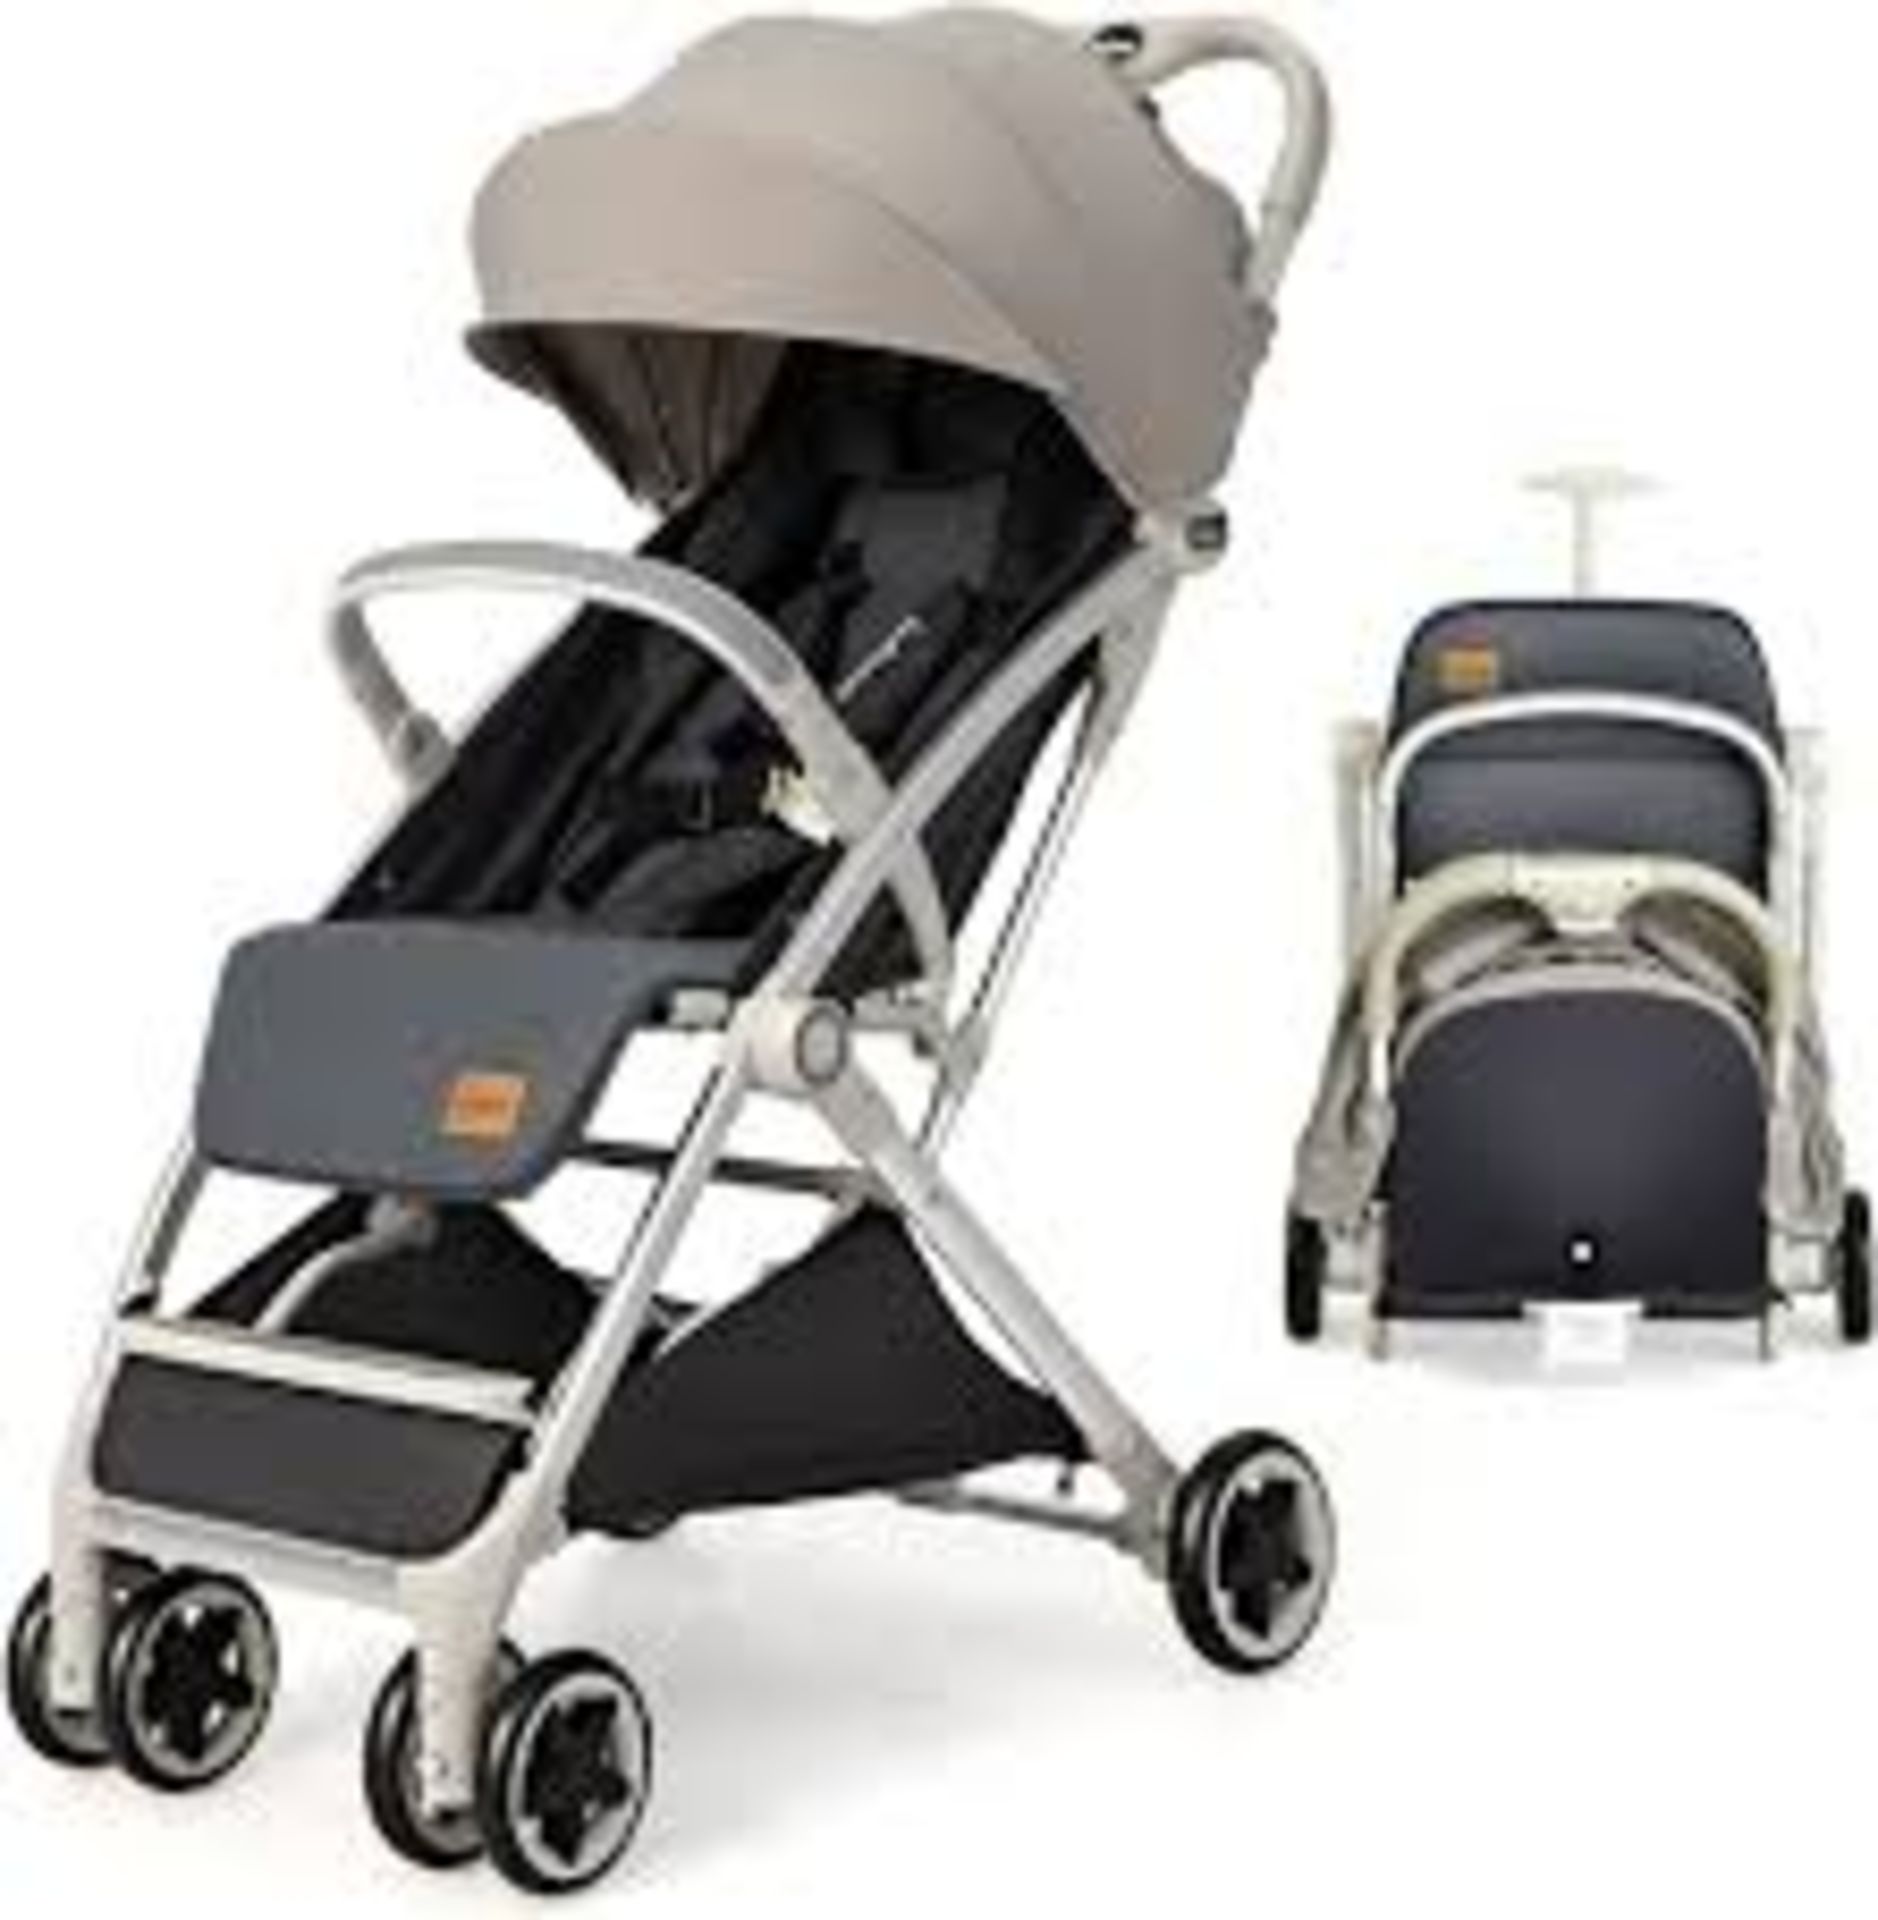 Baby Stroller, Protable Travel Buggy with 5-Point Harness, Adjustable Canopy, Footrest & Seat, One-